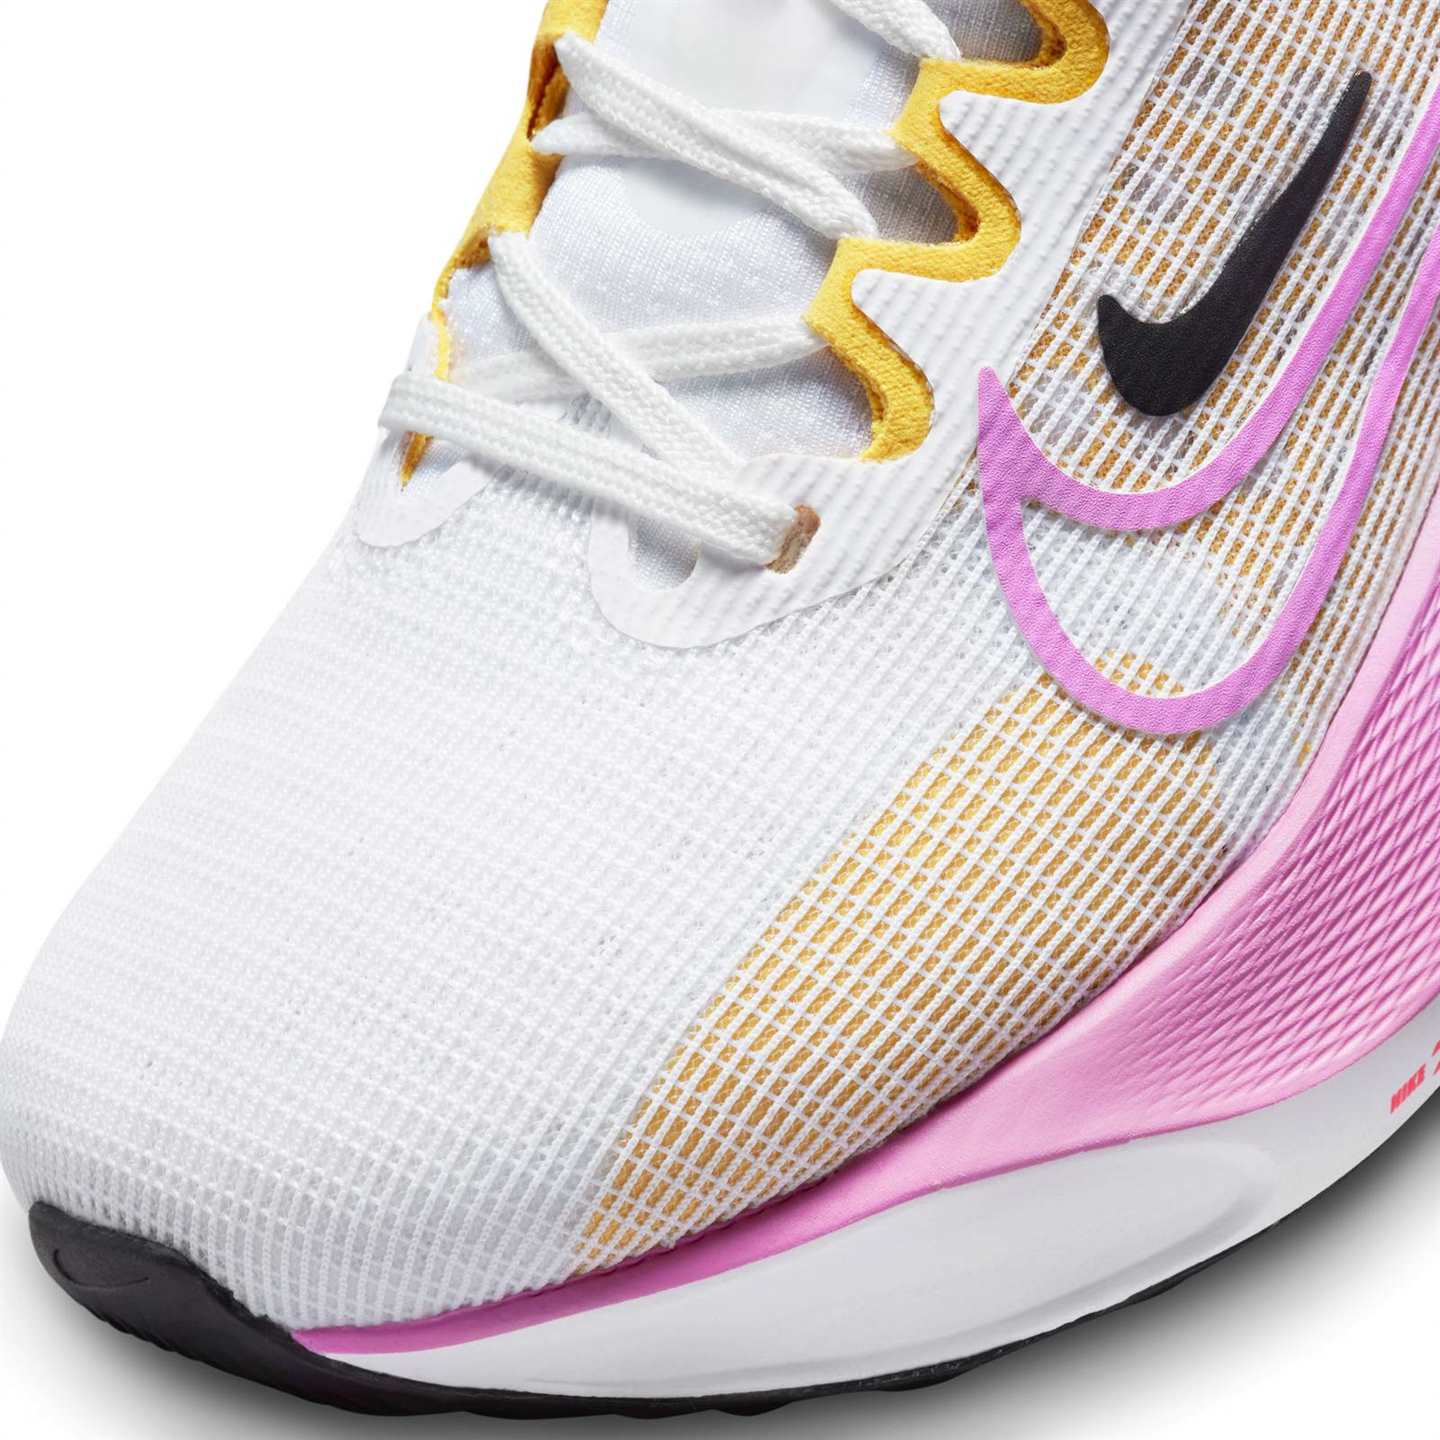 NIKE ZOOM FLY 5 WOMENS ROAD RUNNING SHOES